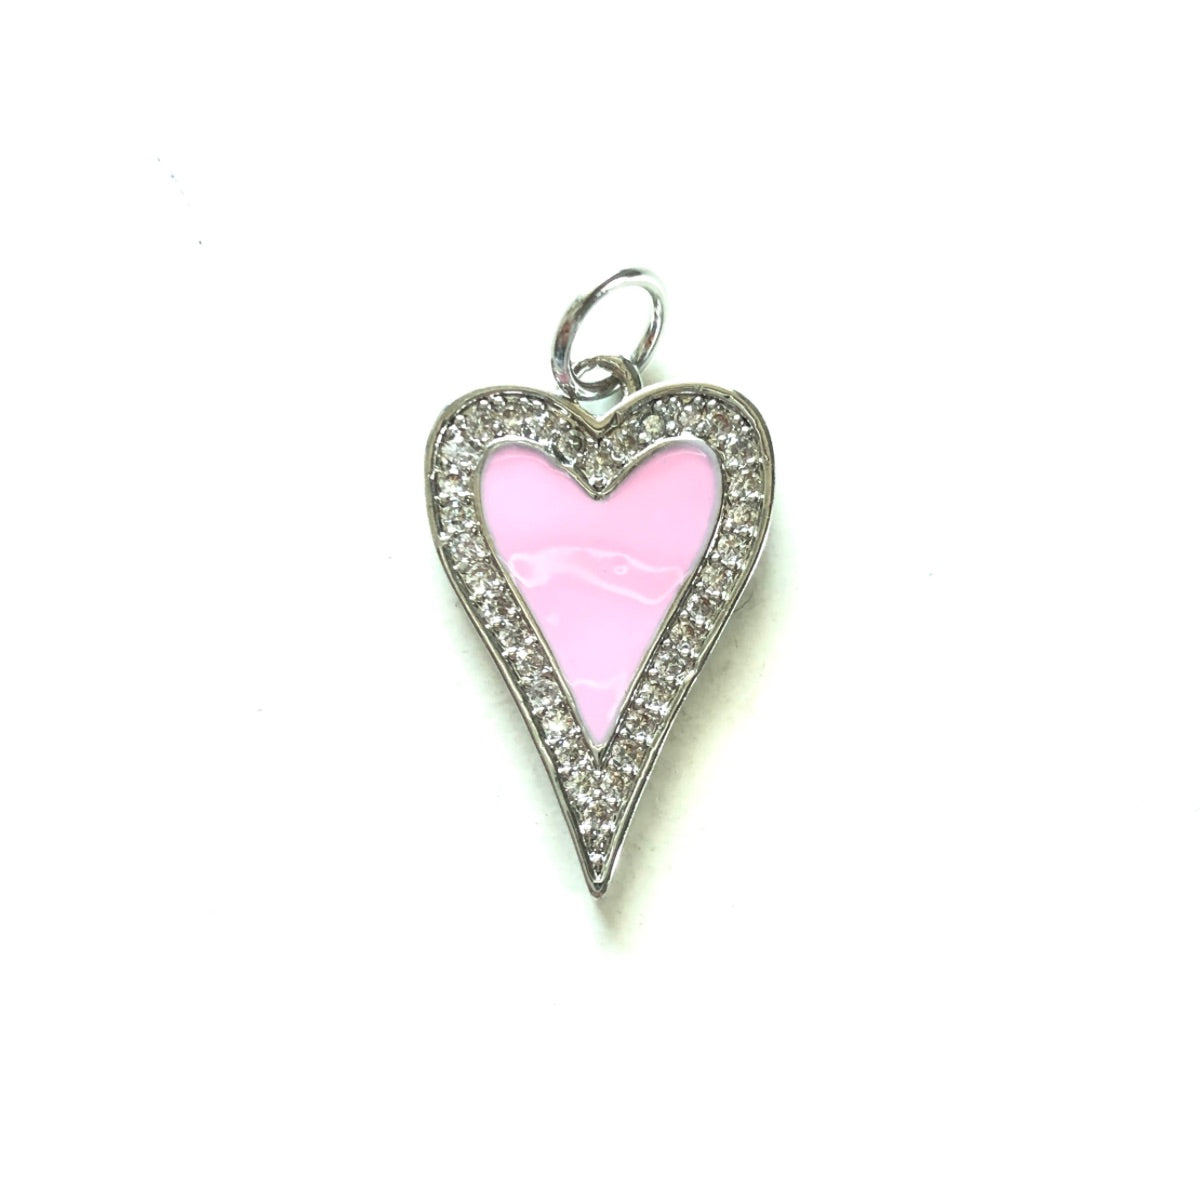 10pcs/lot 23.4*14.6mm Red, Pink, White, Black, Fuchsia Enamel CZ Pave Heart Charms-Silver Pink CZ Paved Charms Hearts New Charms Arrivals Charms Beads Beyond